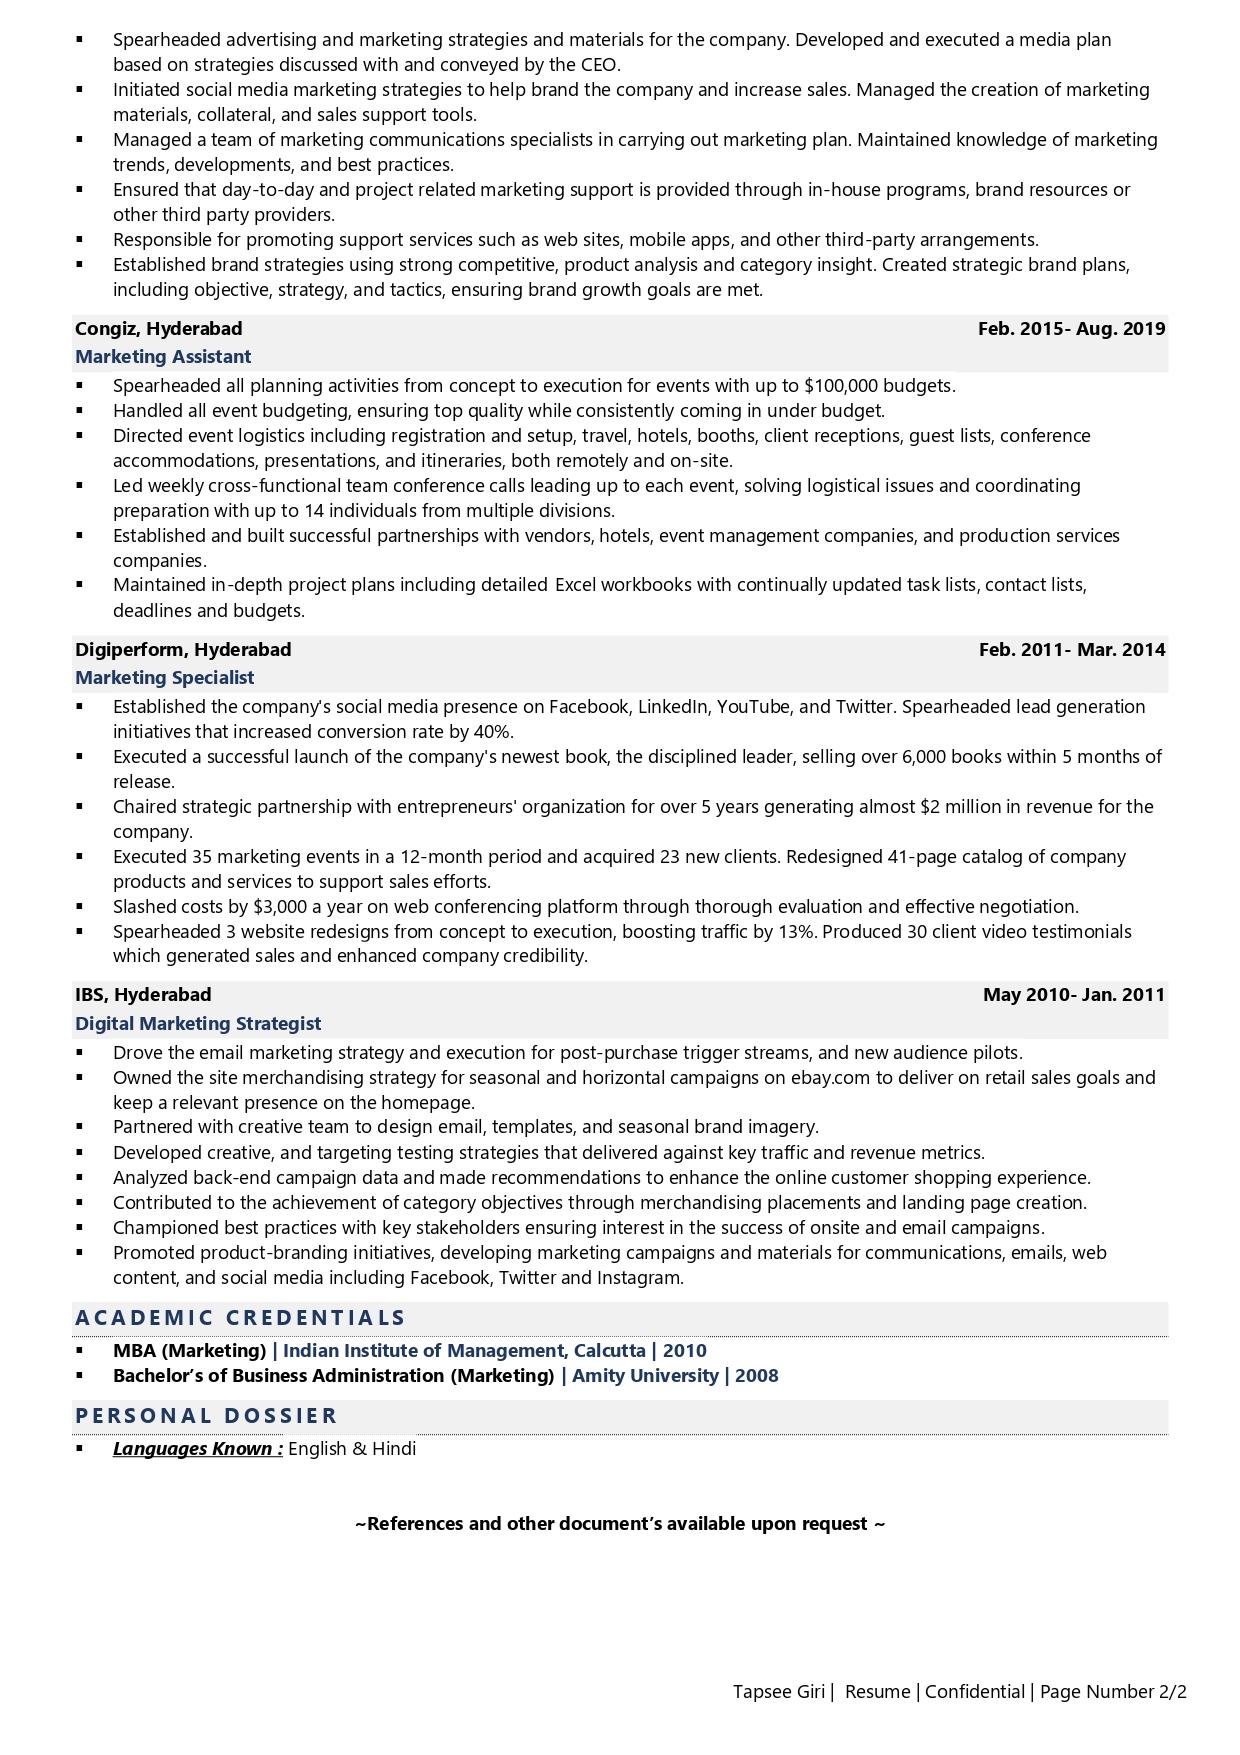 Marketing Manager - Resume Example & Template